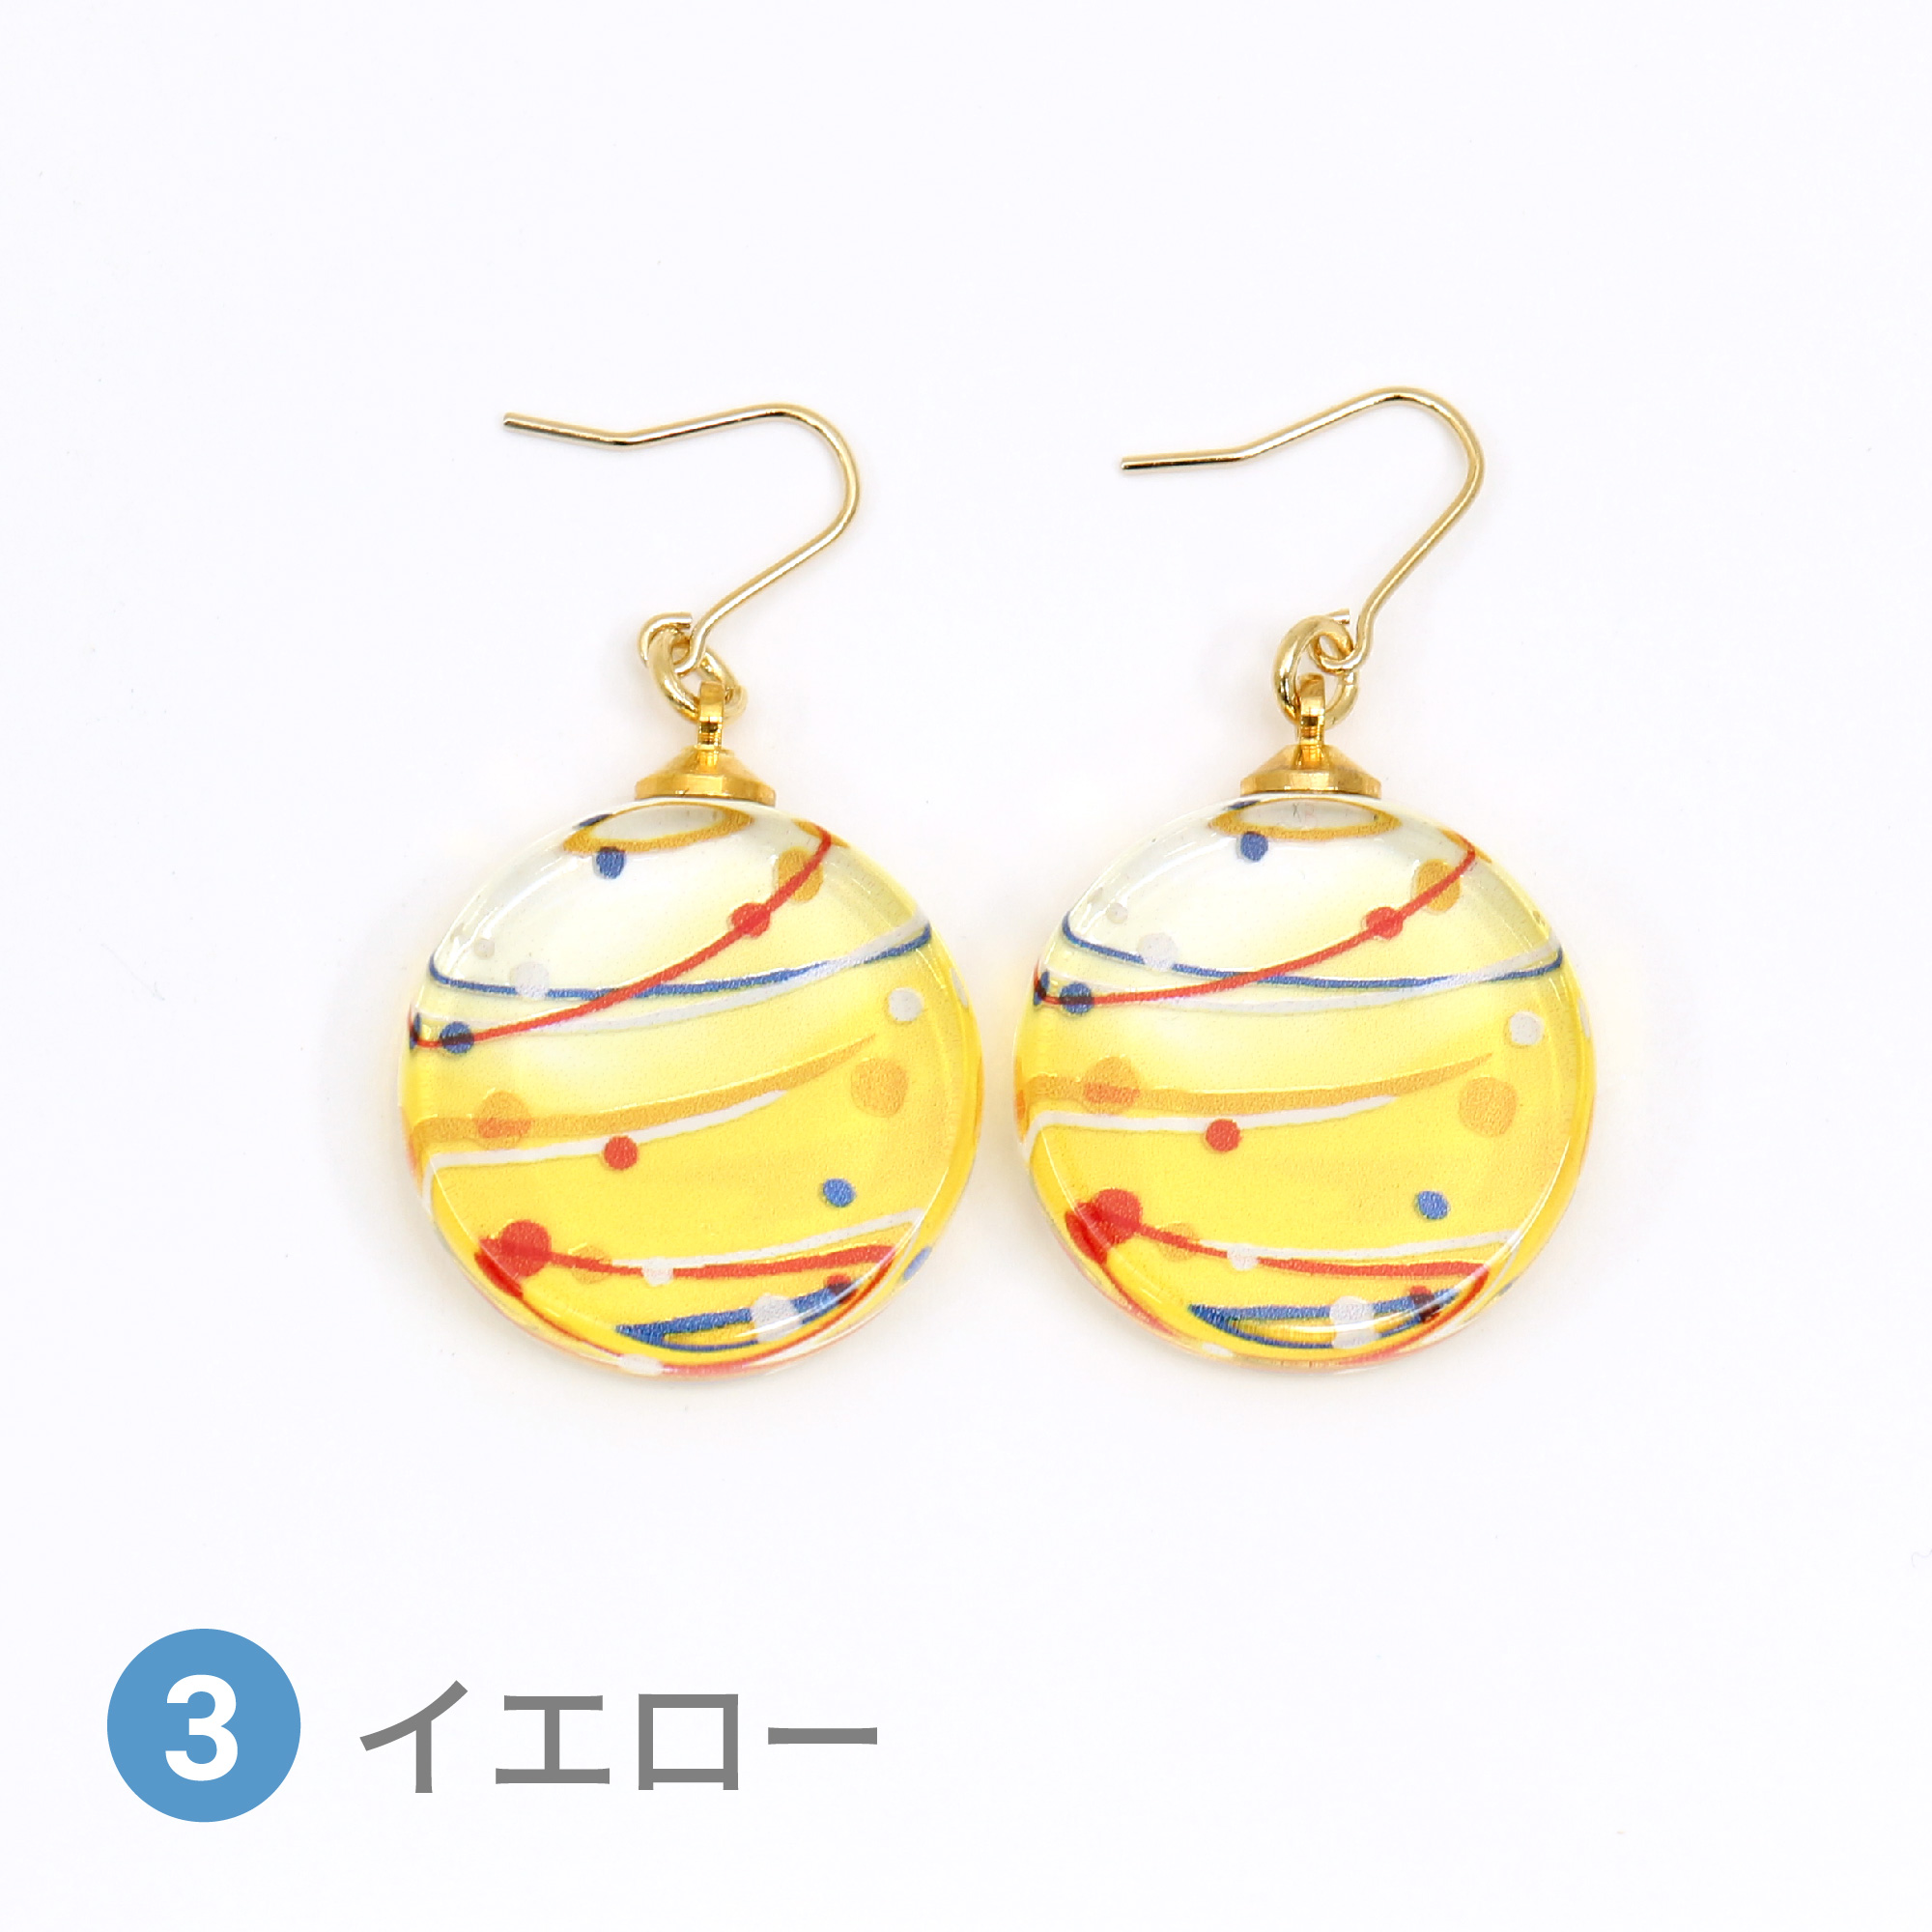 Glass accessories Pierced Earring WATER BALLOON yellow round shape